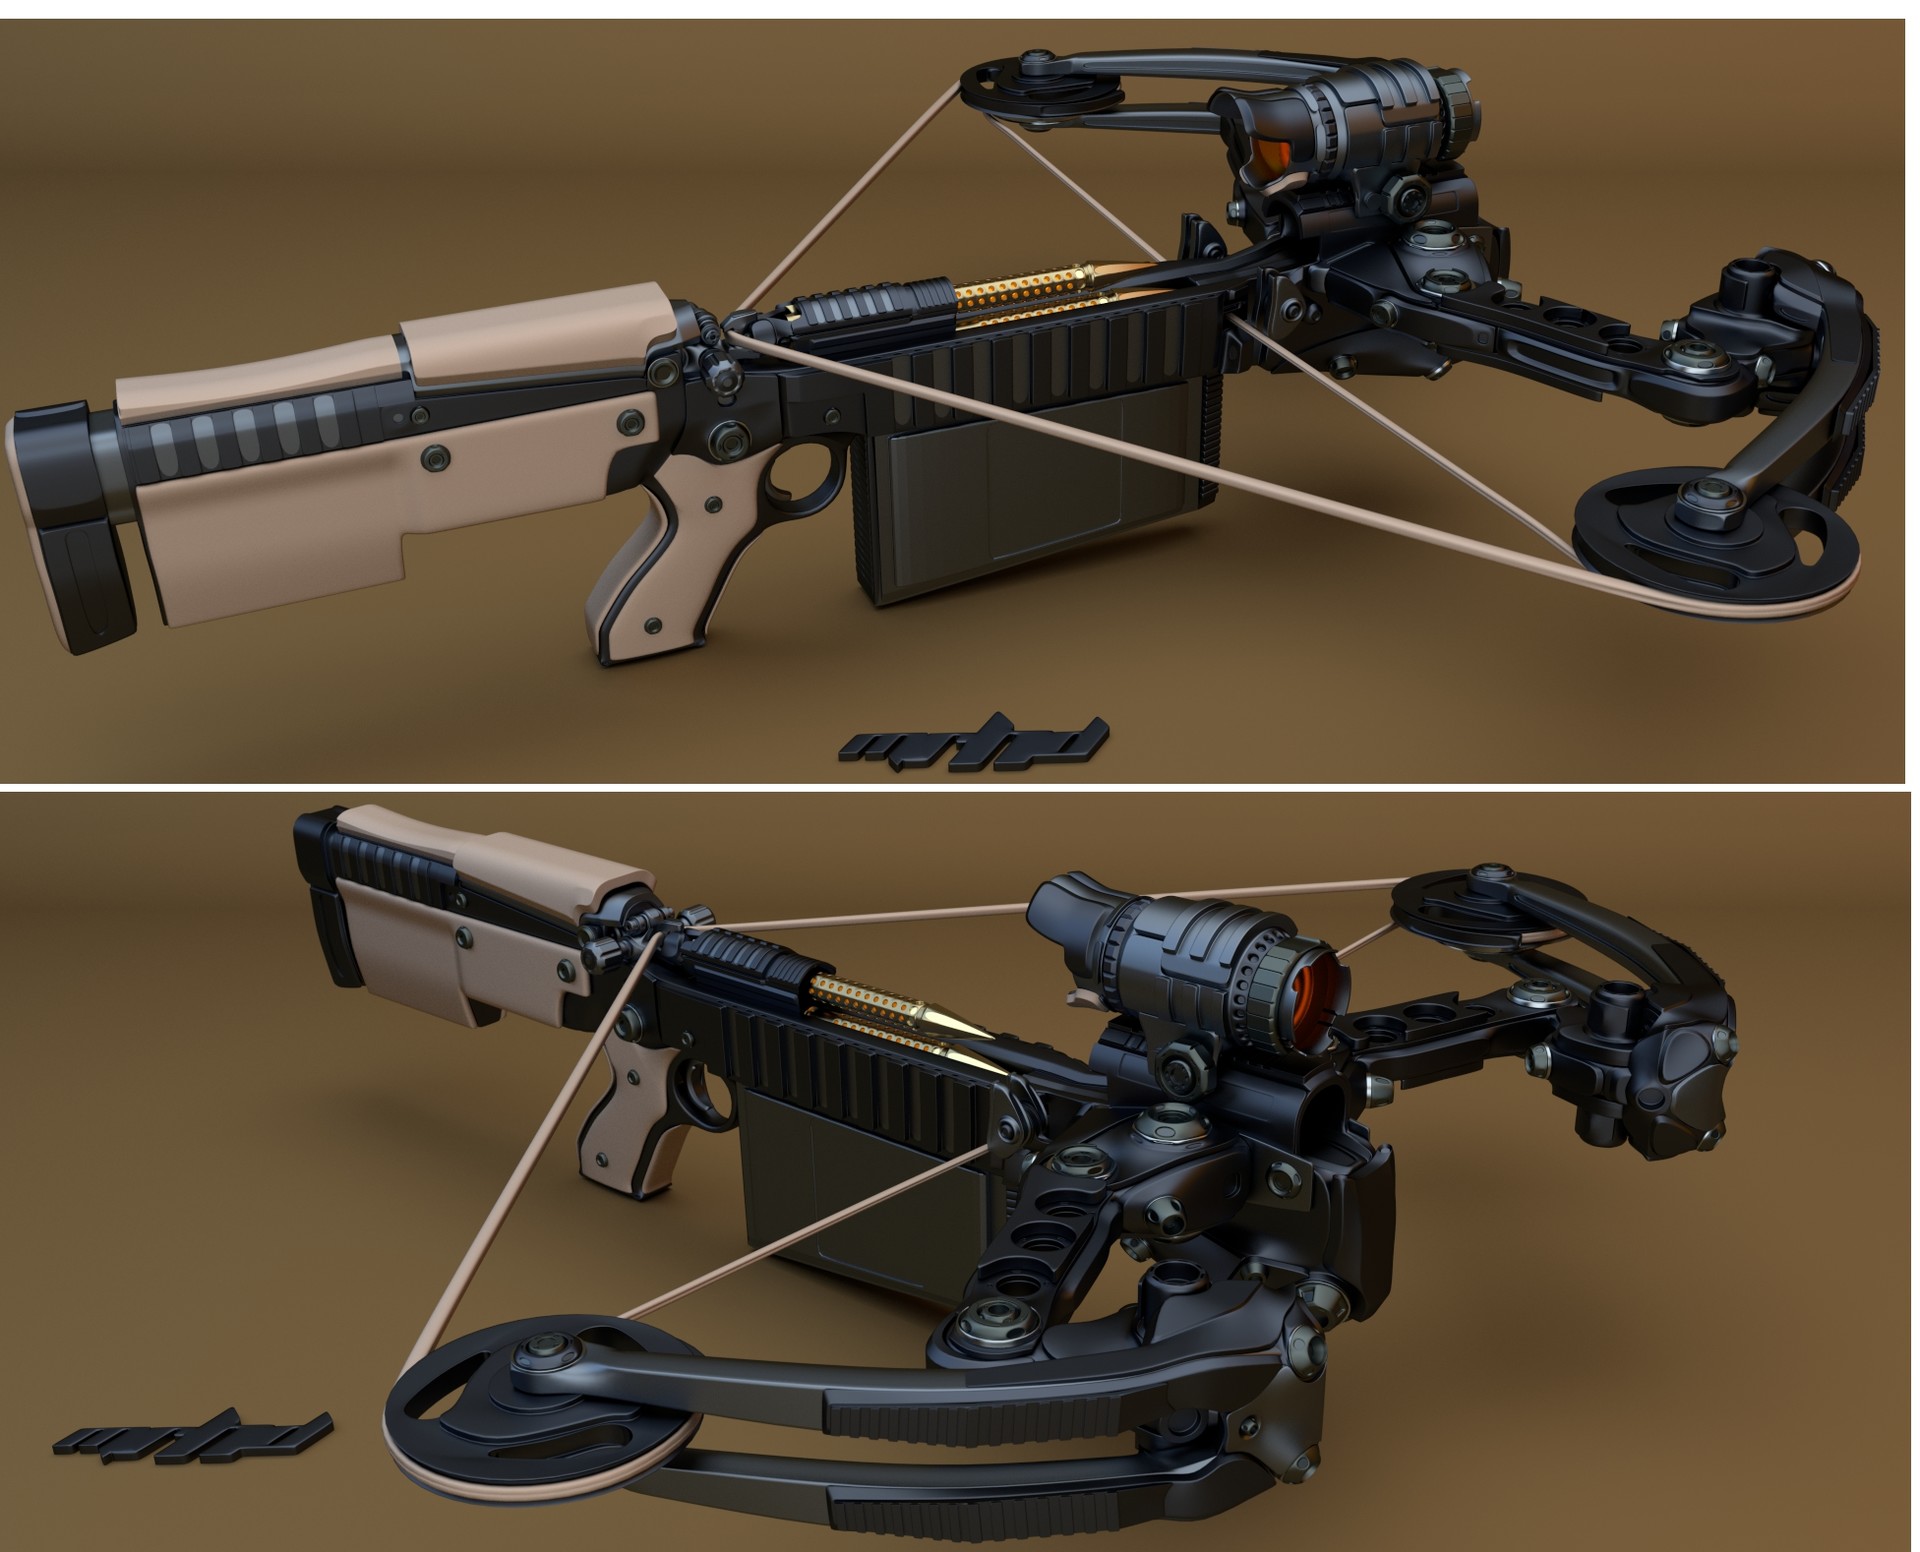 light repeating crossbow